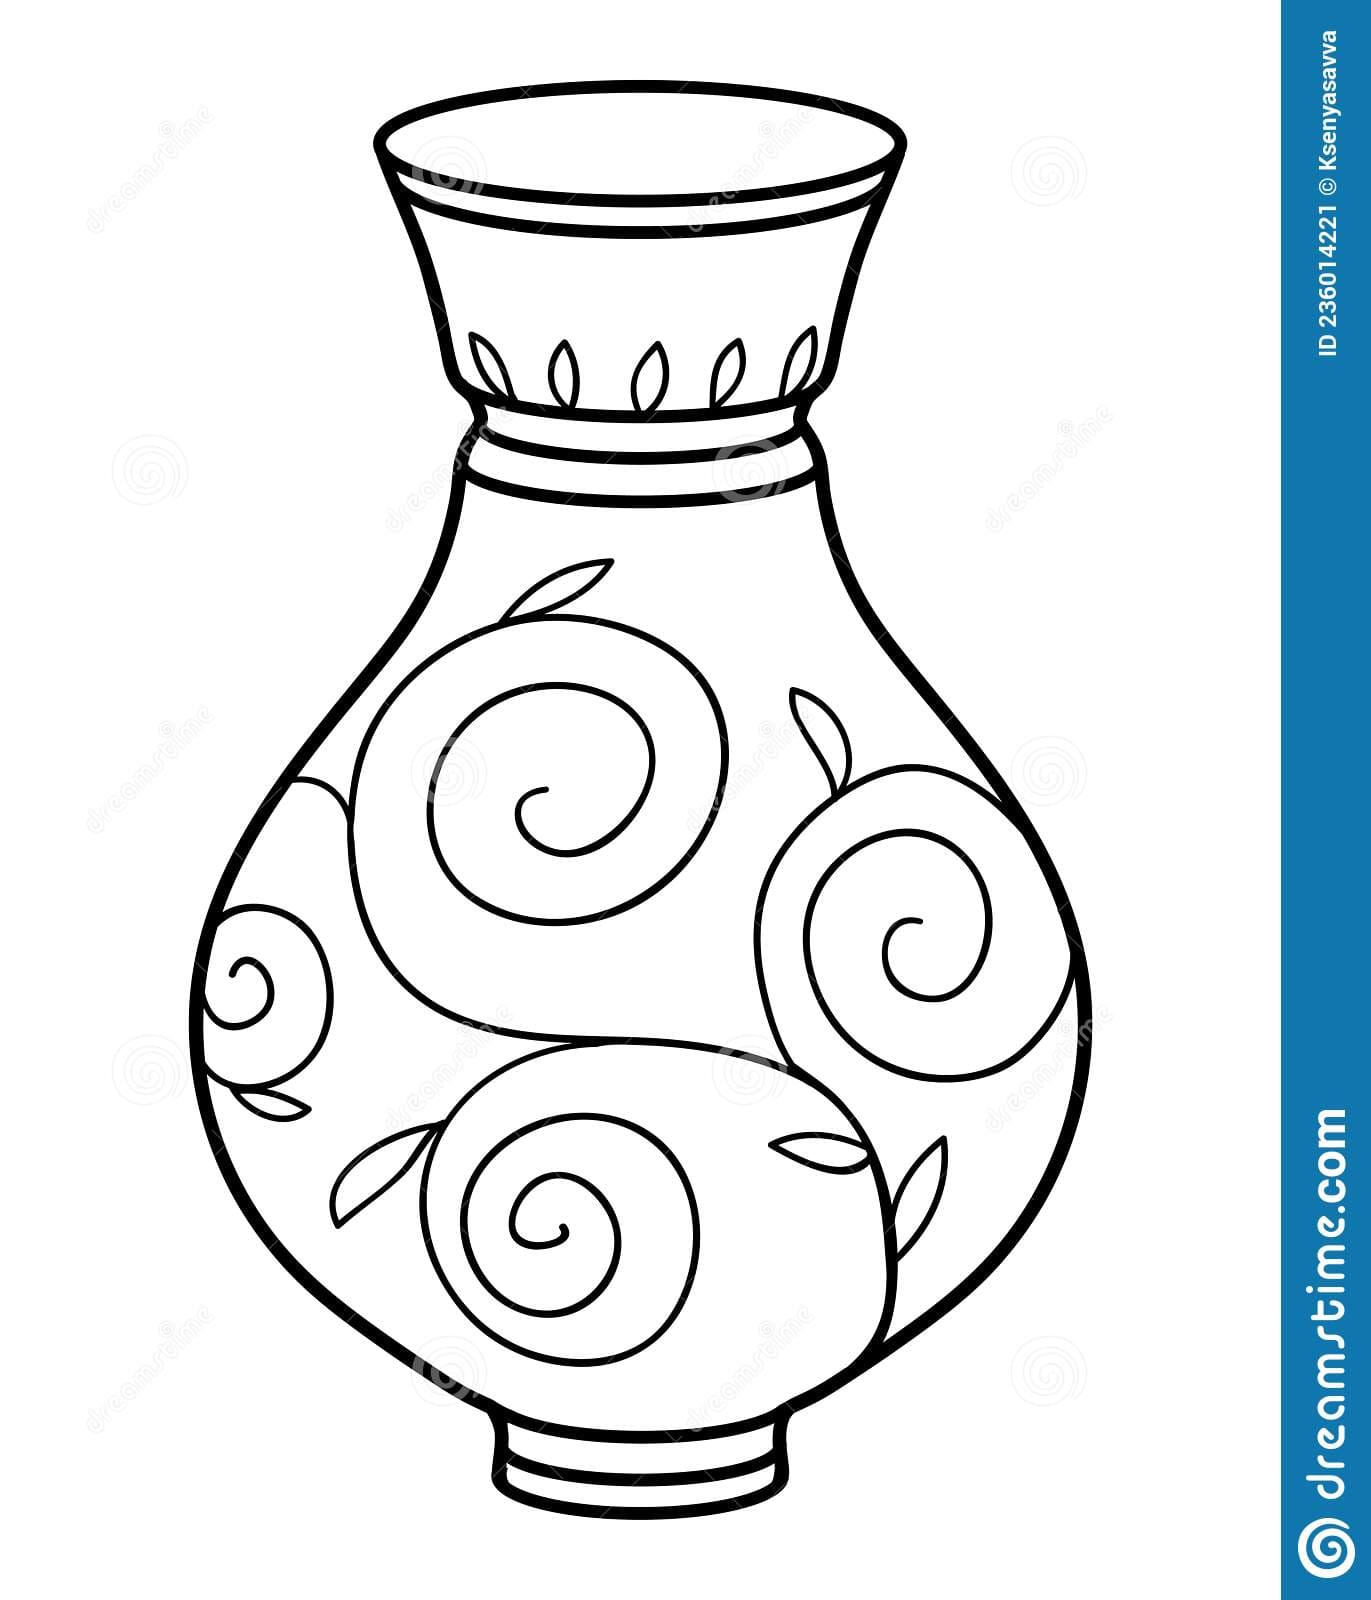 Coloring Book For Kids Coloring Page